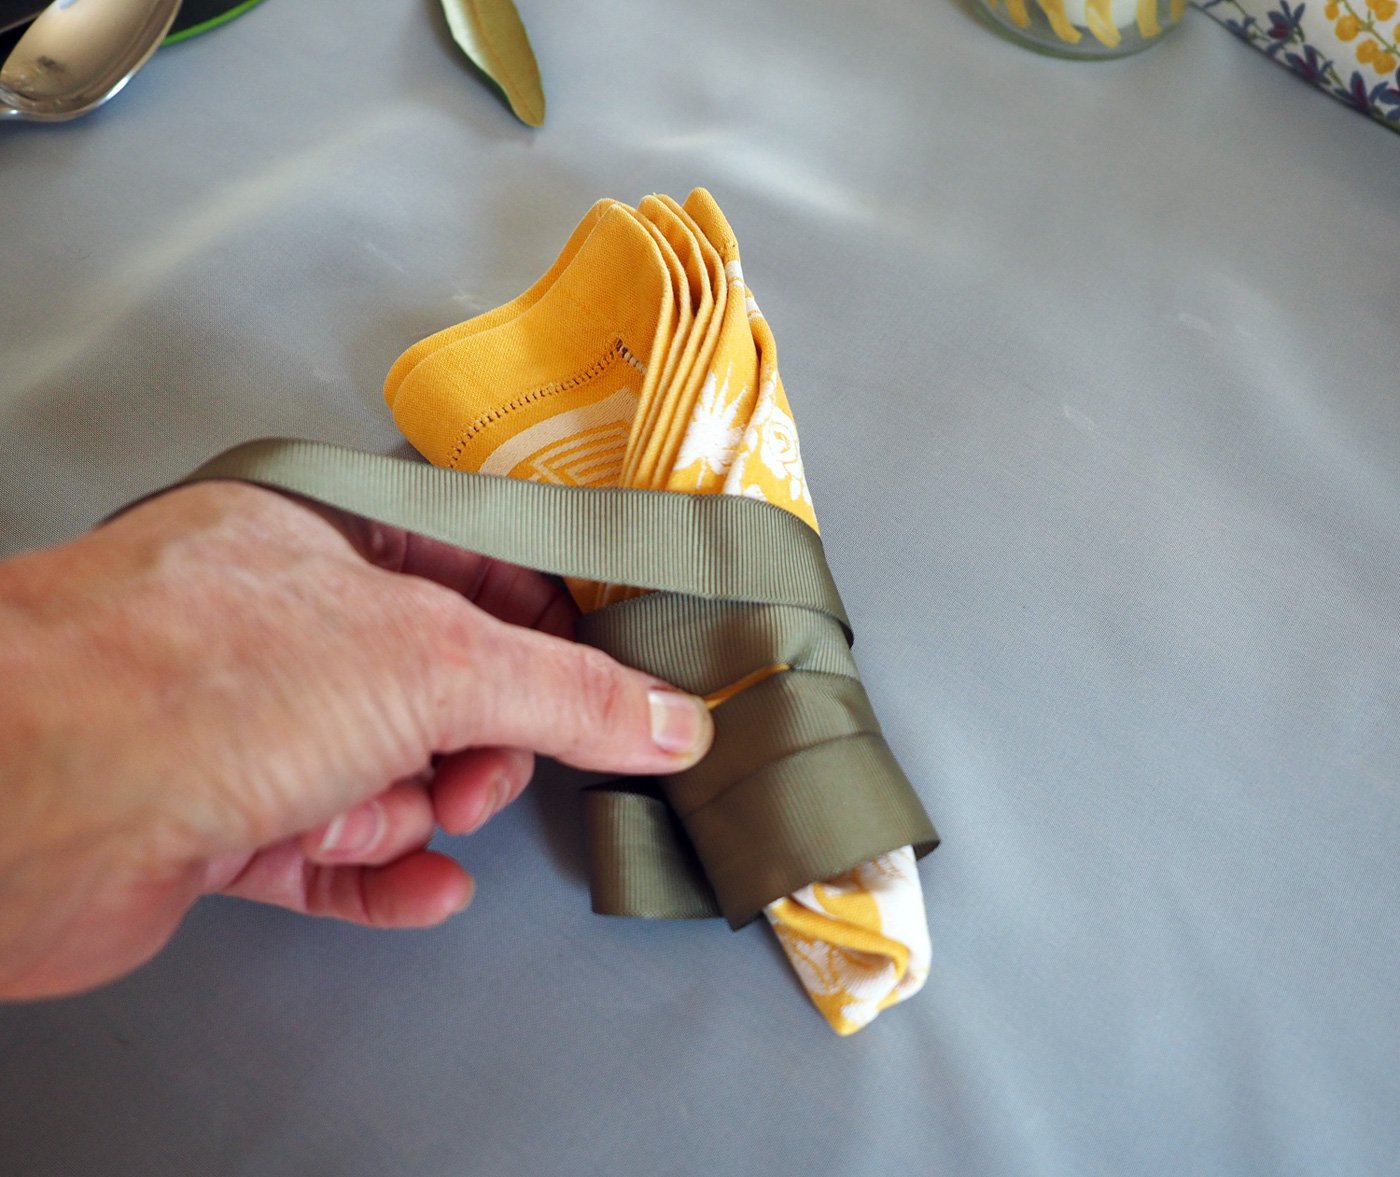 Wrap the bottom portion to resemble a stem.